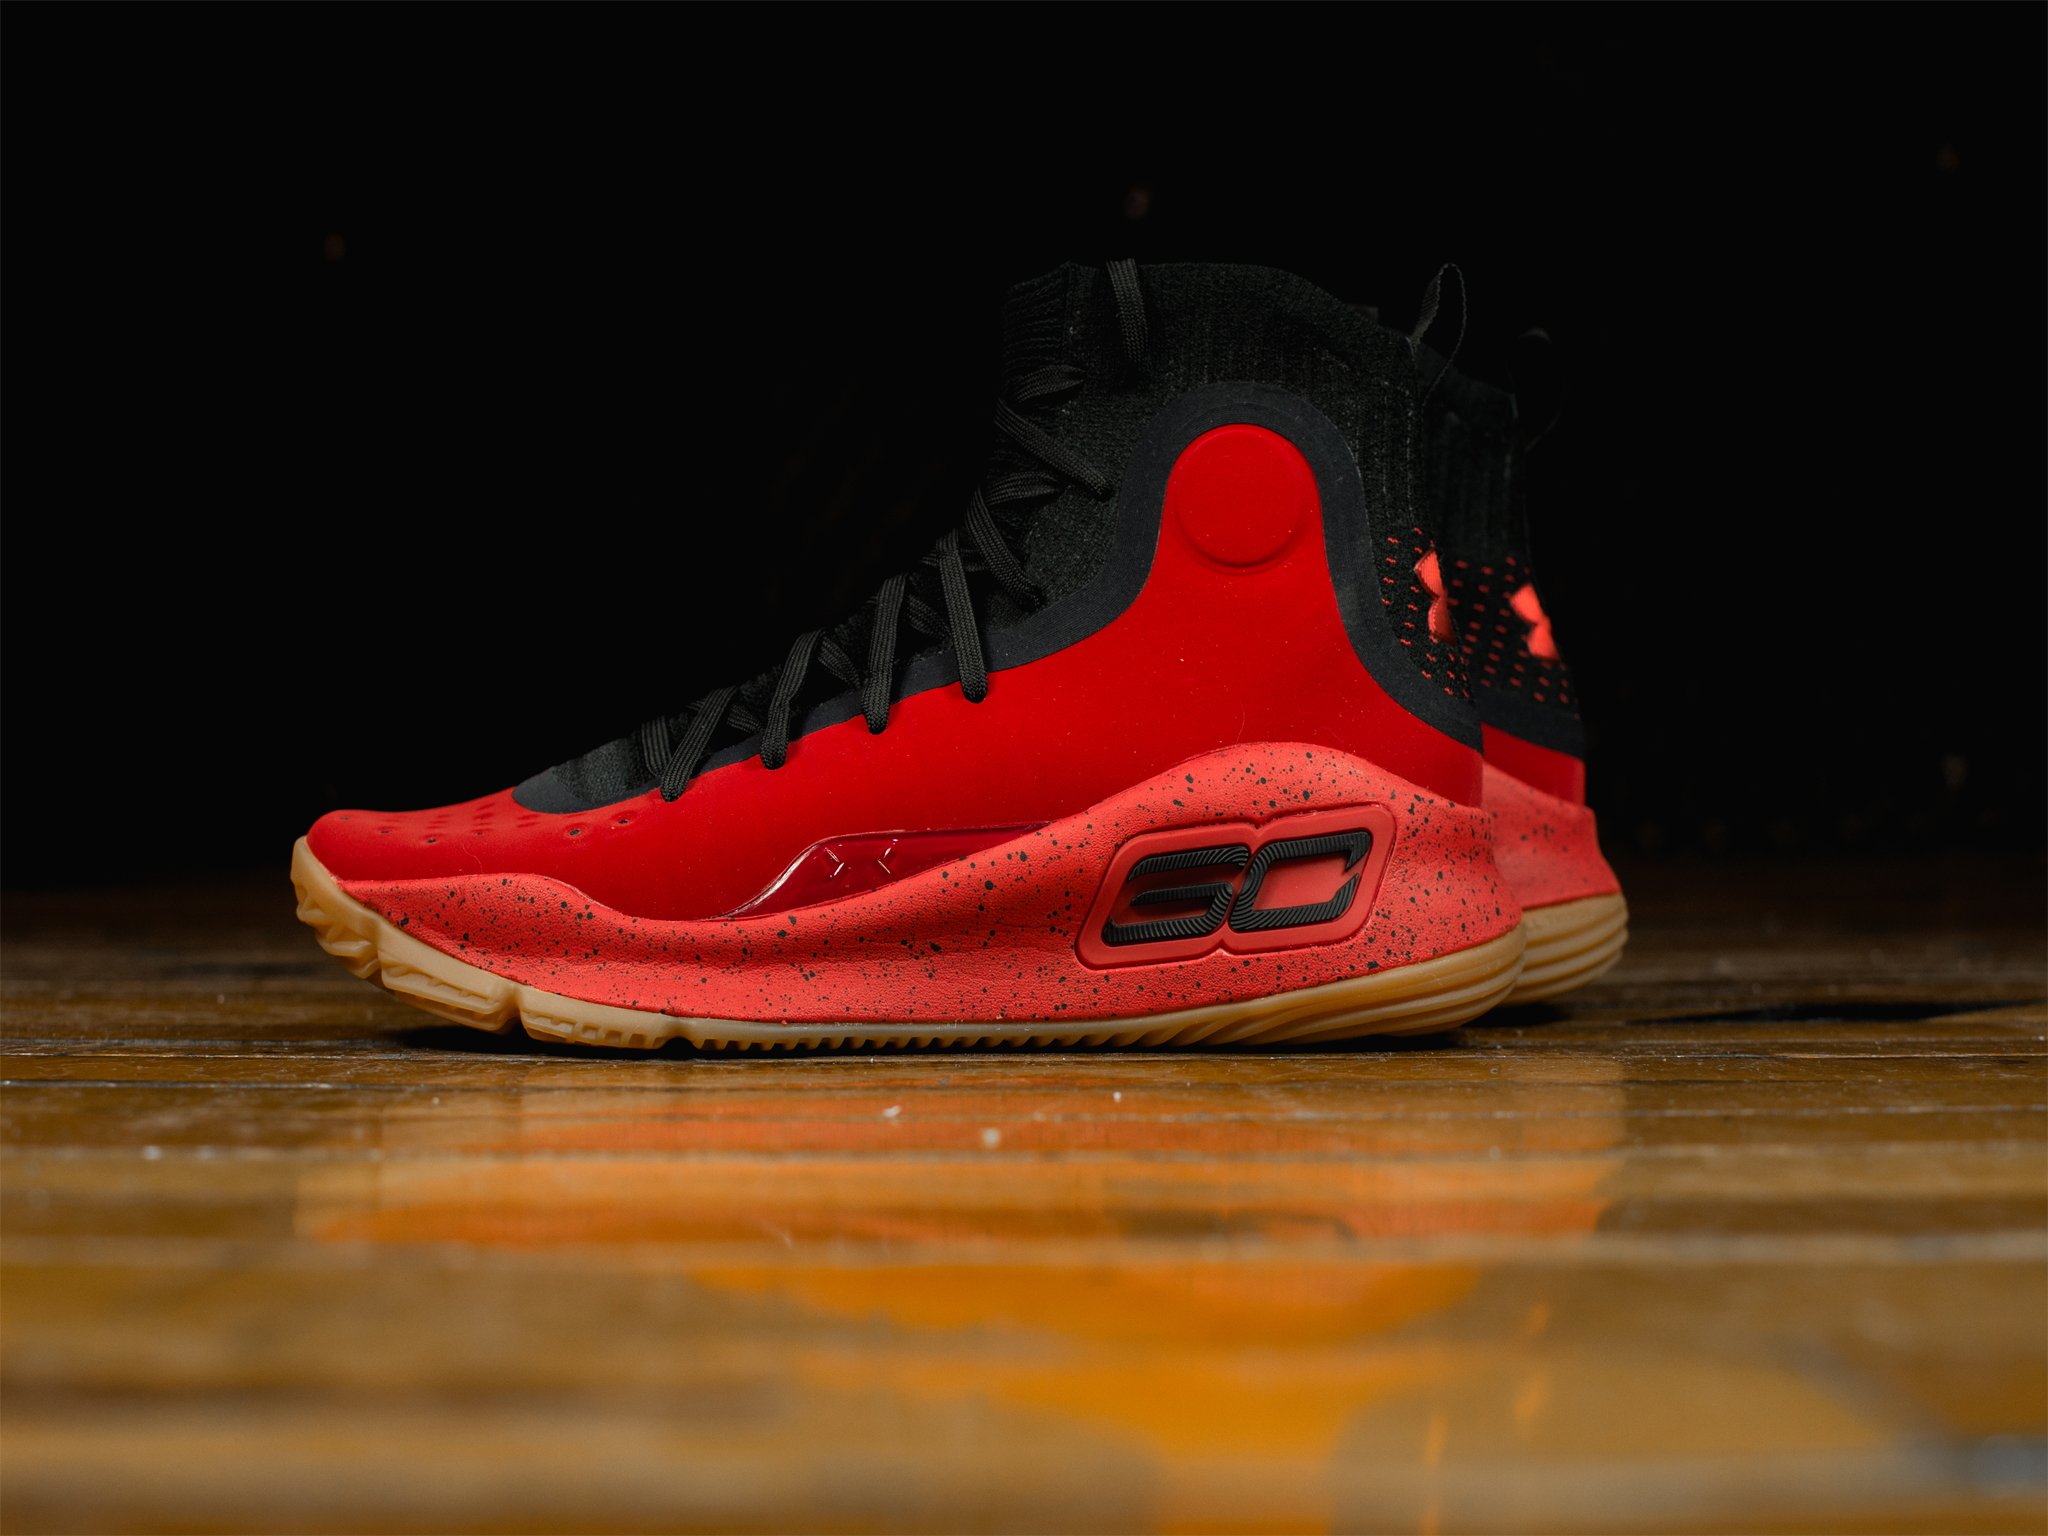 A Detailed Look at the Upcoming Under Armour Curry 4 in Black/Red ...